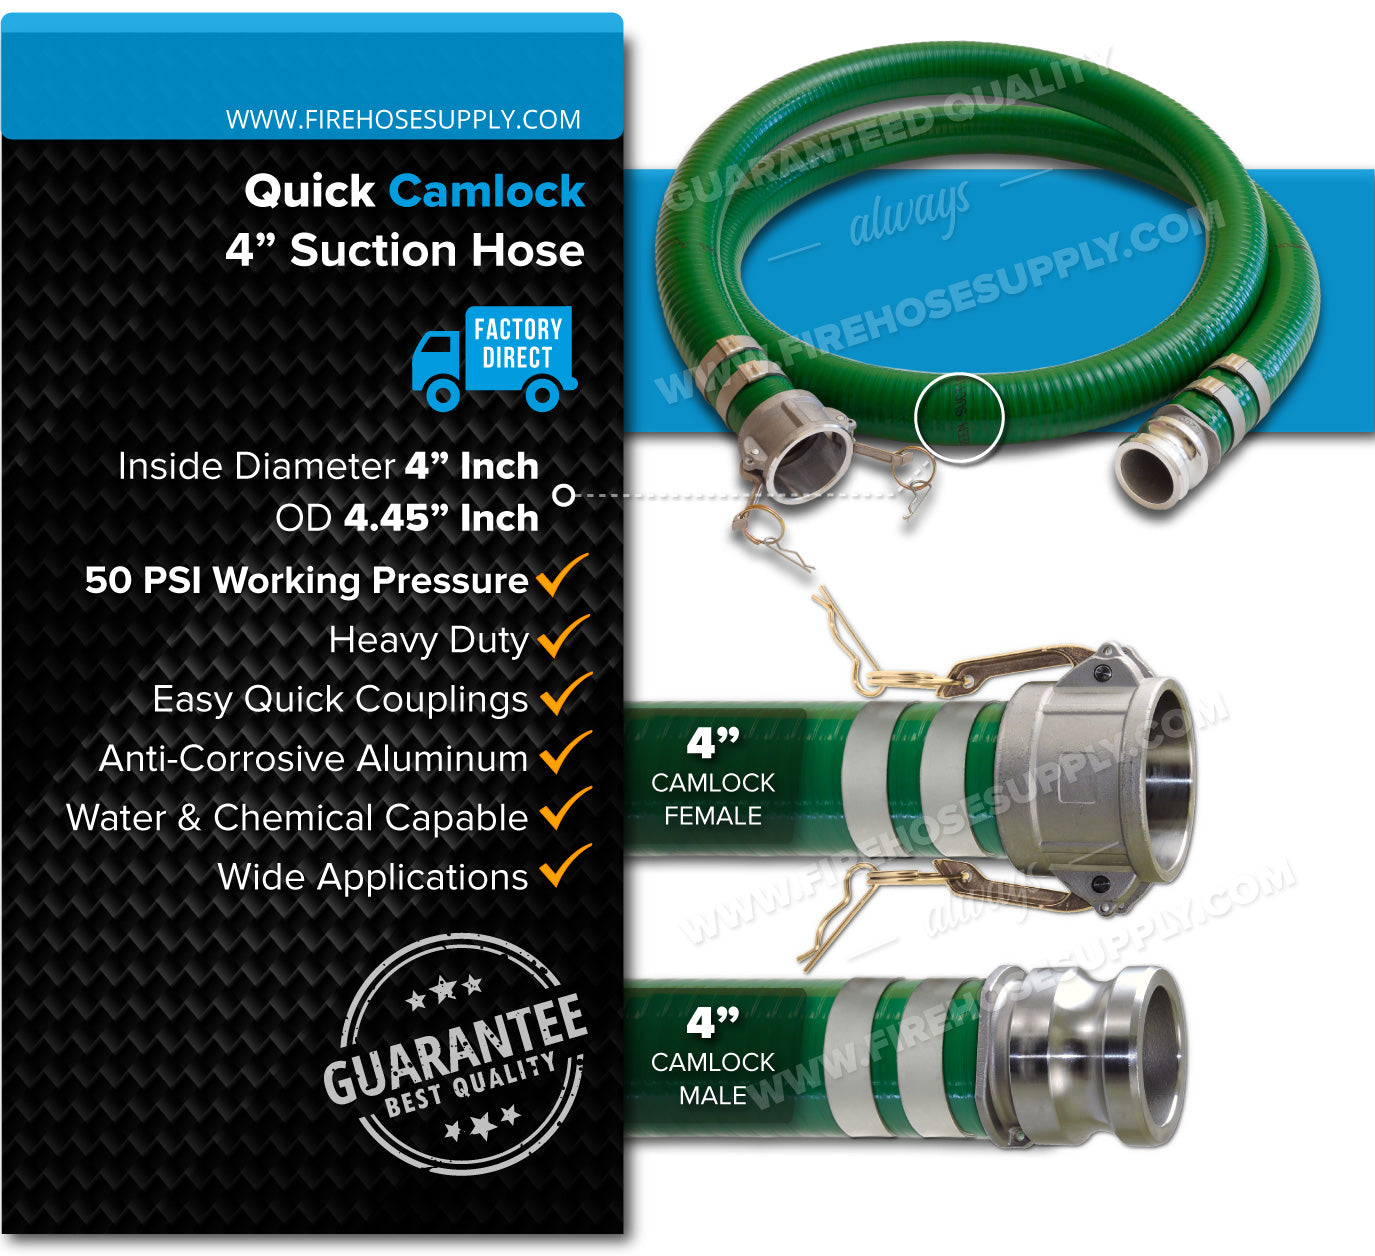 4 Inch Camlock Female x Male Green Suction Hose Overview